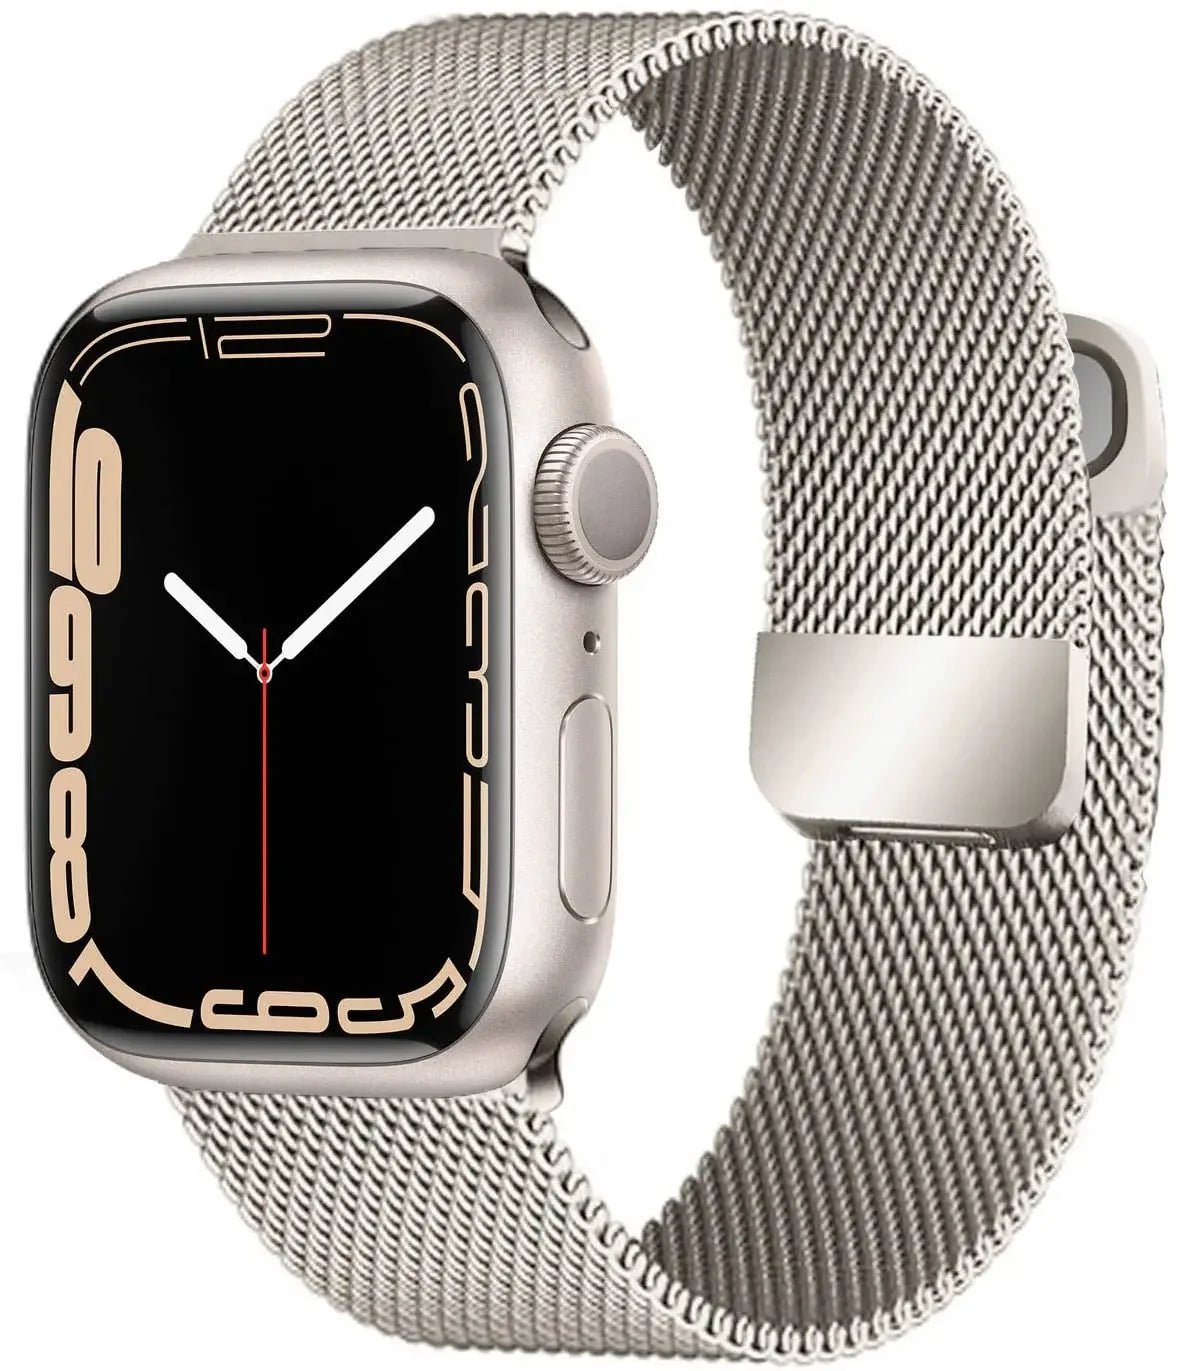 Stainless Steel Milanese Loop Band for Apple Watch - Phoneify